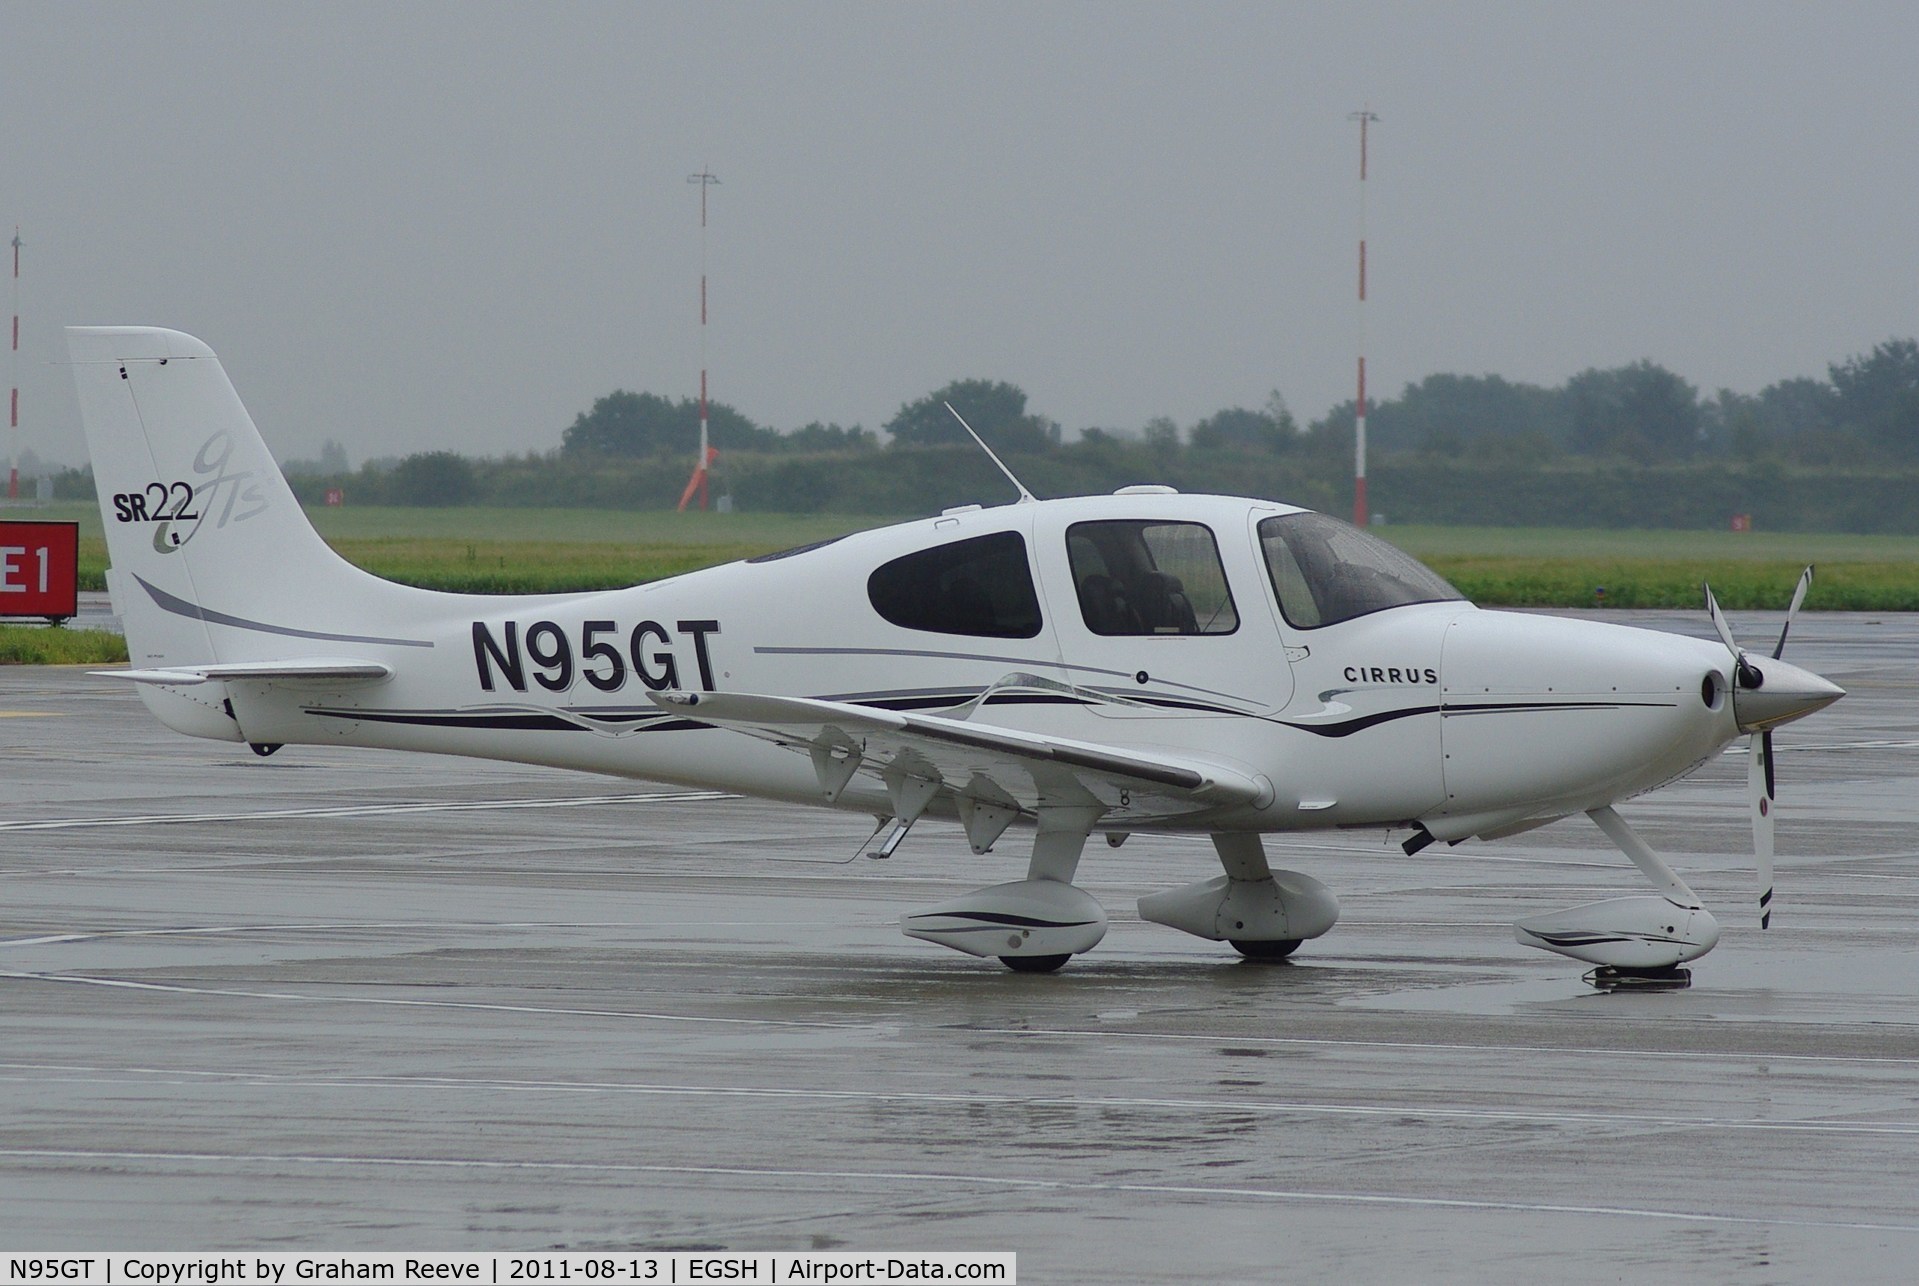 N95GT, 2006 Cirrus SR22 GTS C/N 1758, Parked on a wet morning.